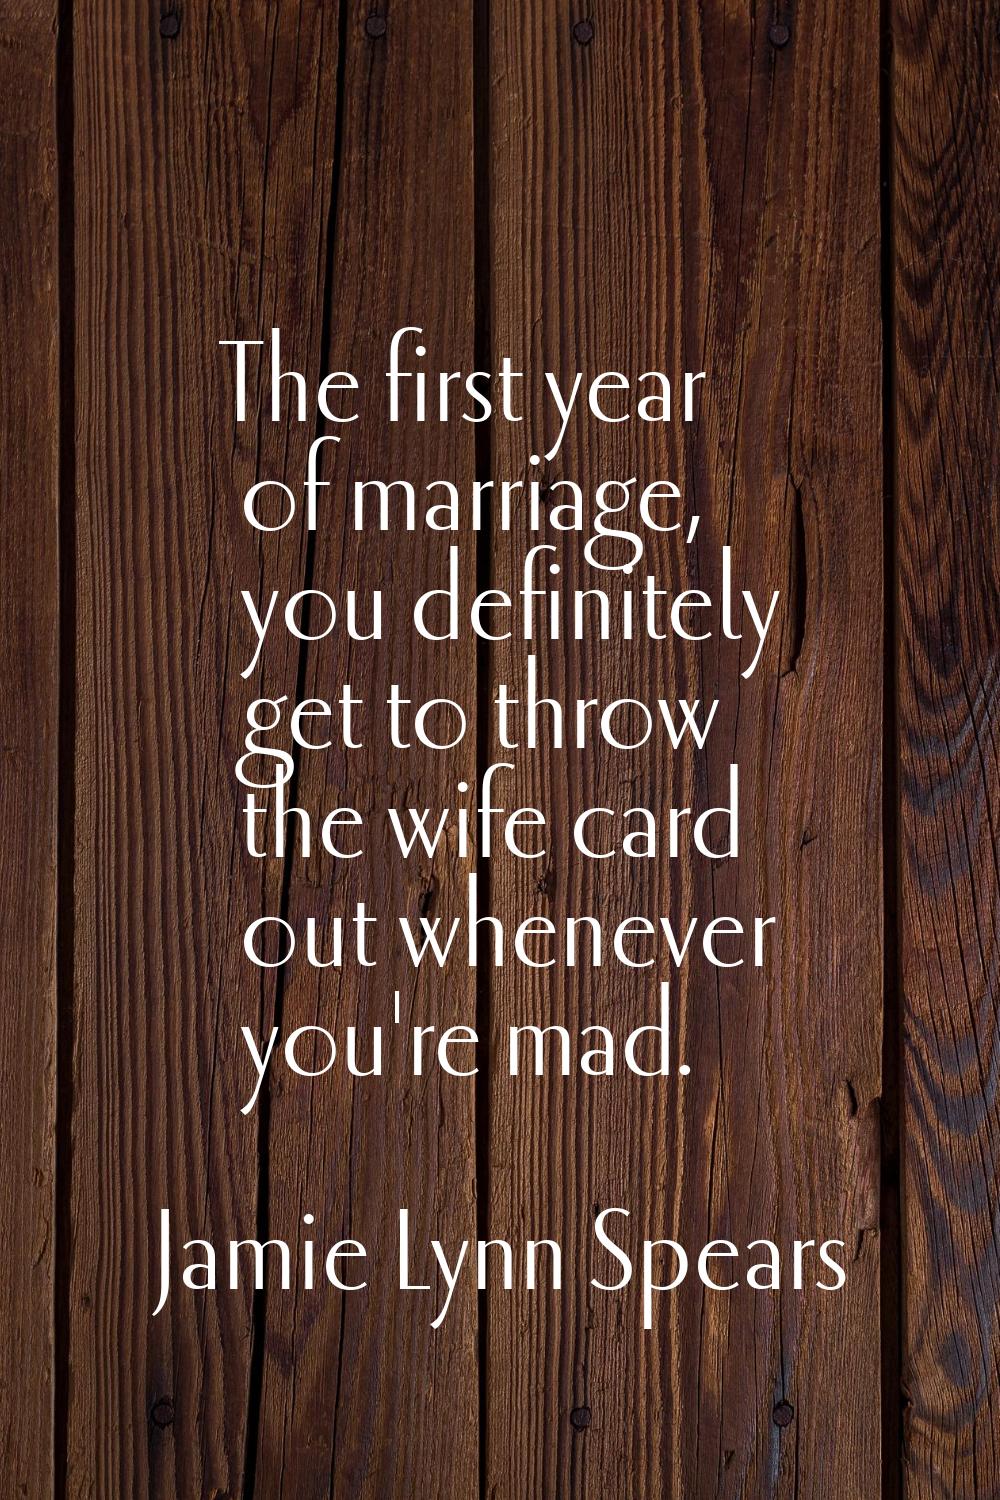 The first year of marriage, you definitely get to throw the wife card out whenever you're mad.